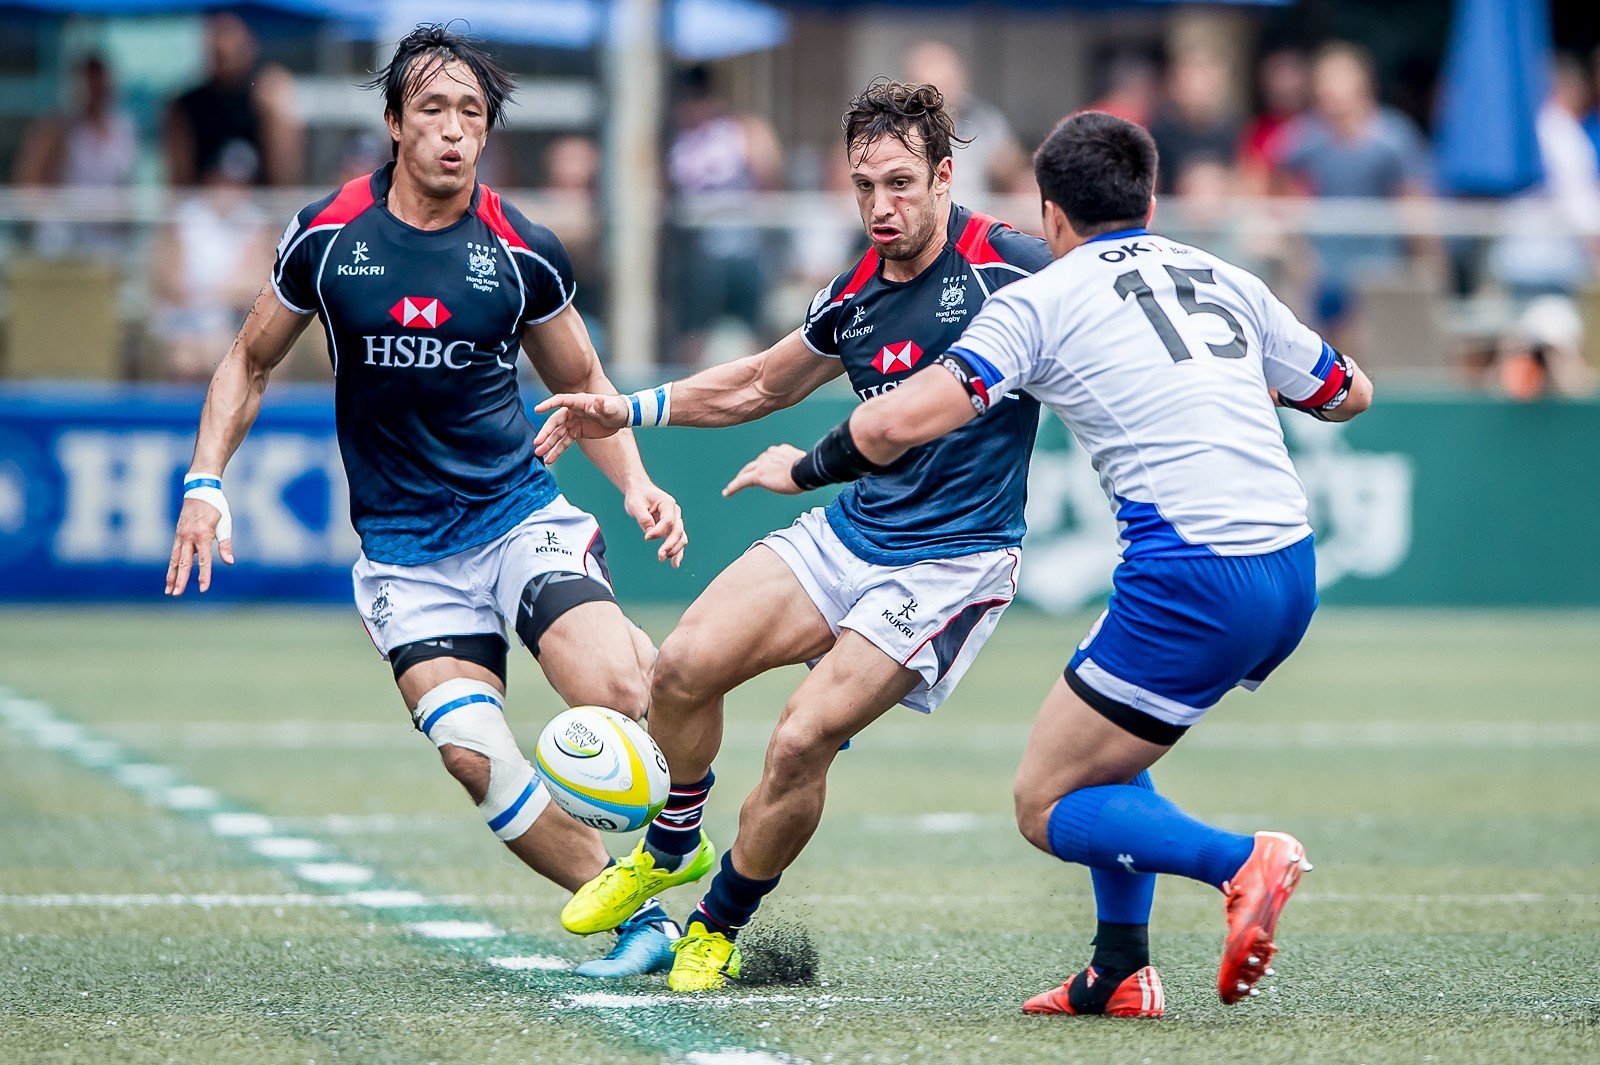 Tyler Spitz is one of the characters in the Hong Kong rugby team. Photos: HKRU